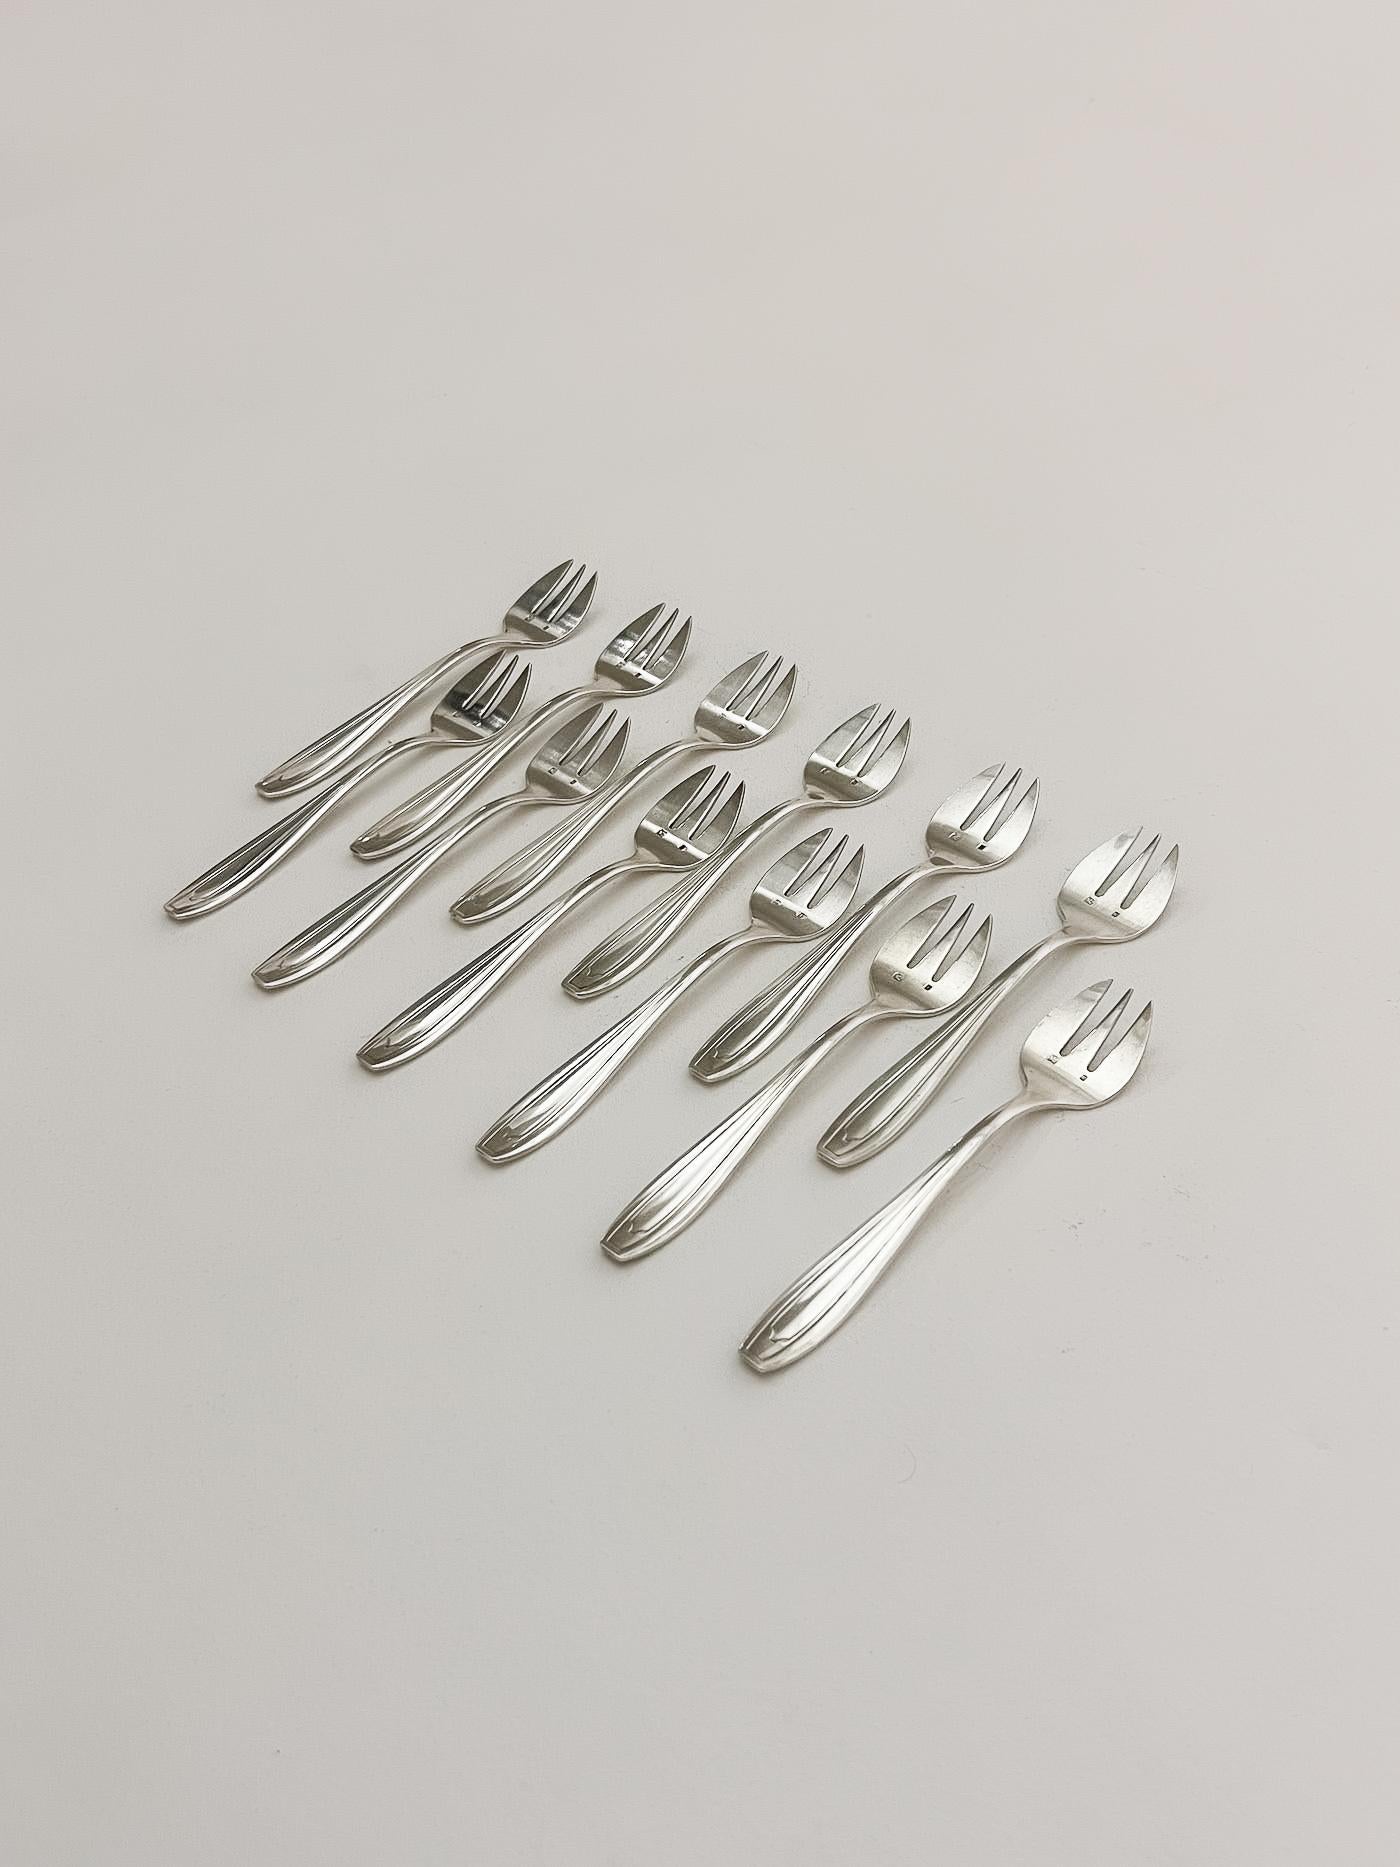 Set of 12 silver-plated oyster forks. Very good condition.
LP2131